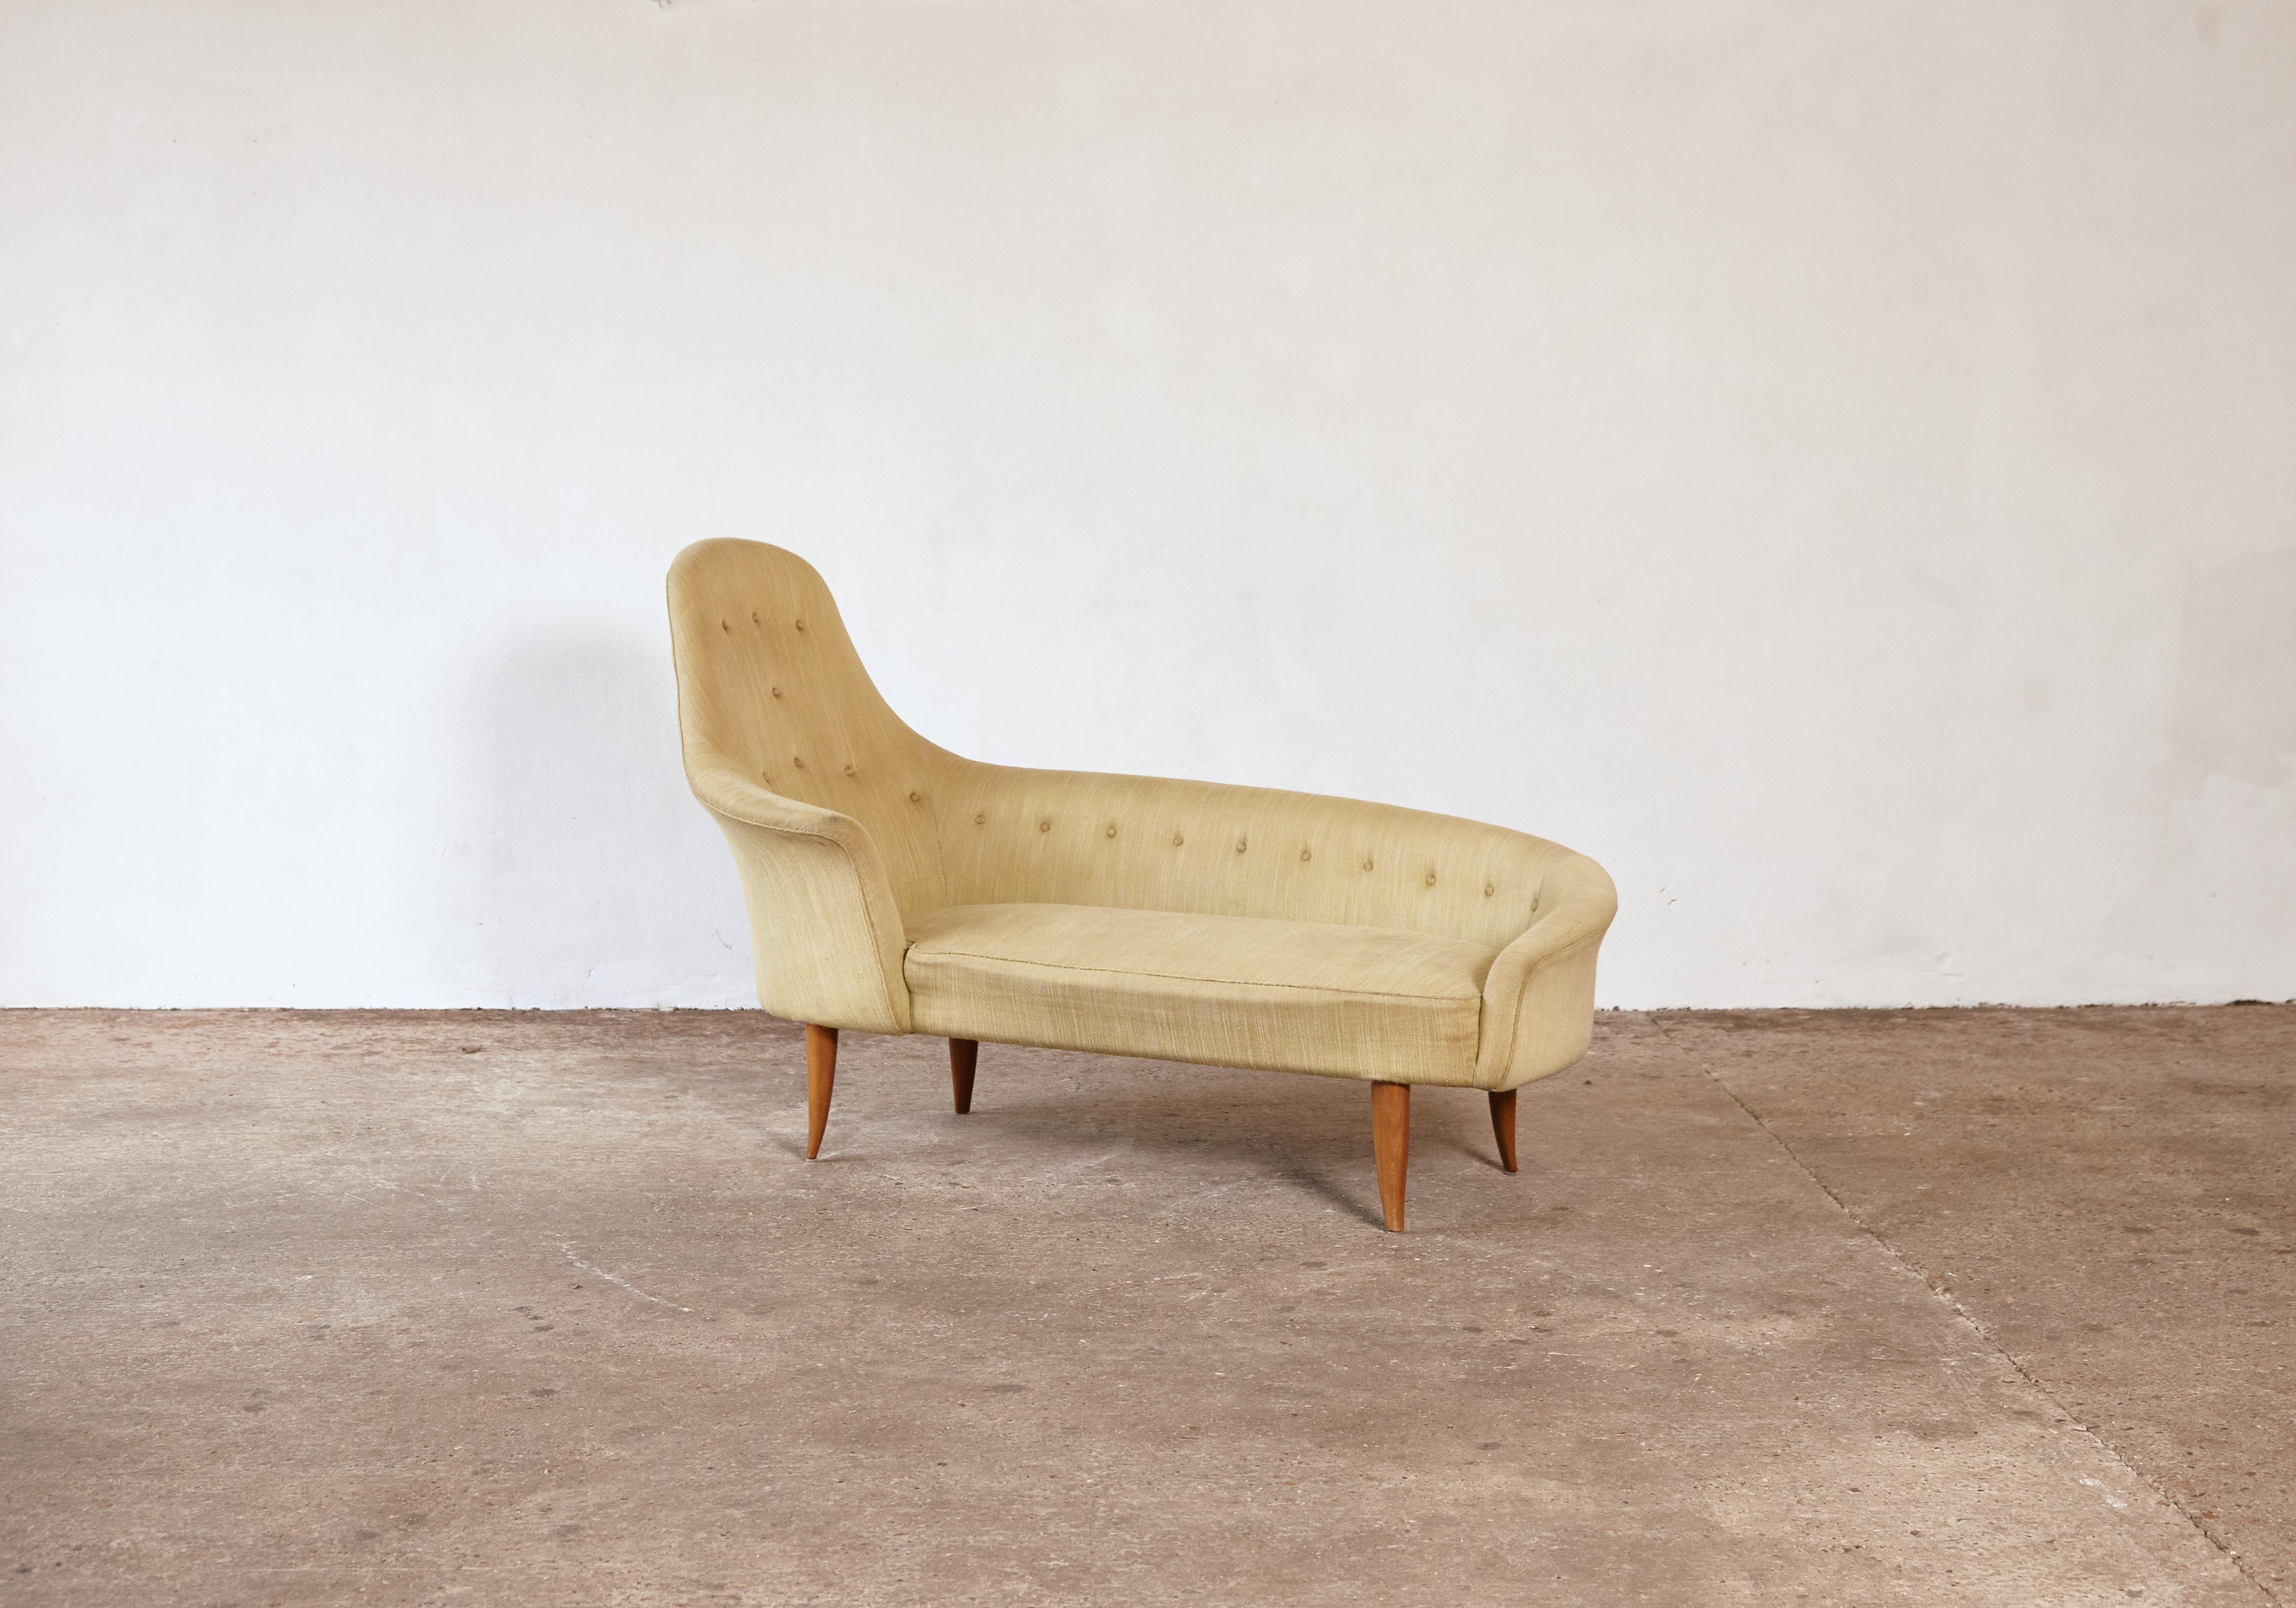 Kerstin Hörlin-Holmquist Garden of Eden (Lustgarden) chaise lounge or daybed. Produced by Nordiska Kompaniets, Sweden, 1958. Beech legs and original fabric. Fabric has minor stains / wear and the filling is somewhat dry so reupholstery is suggested.